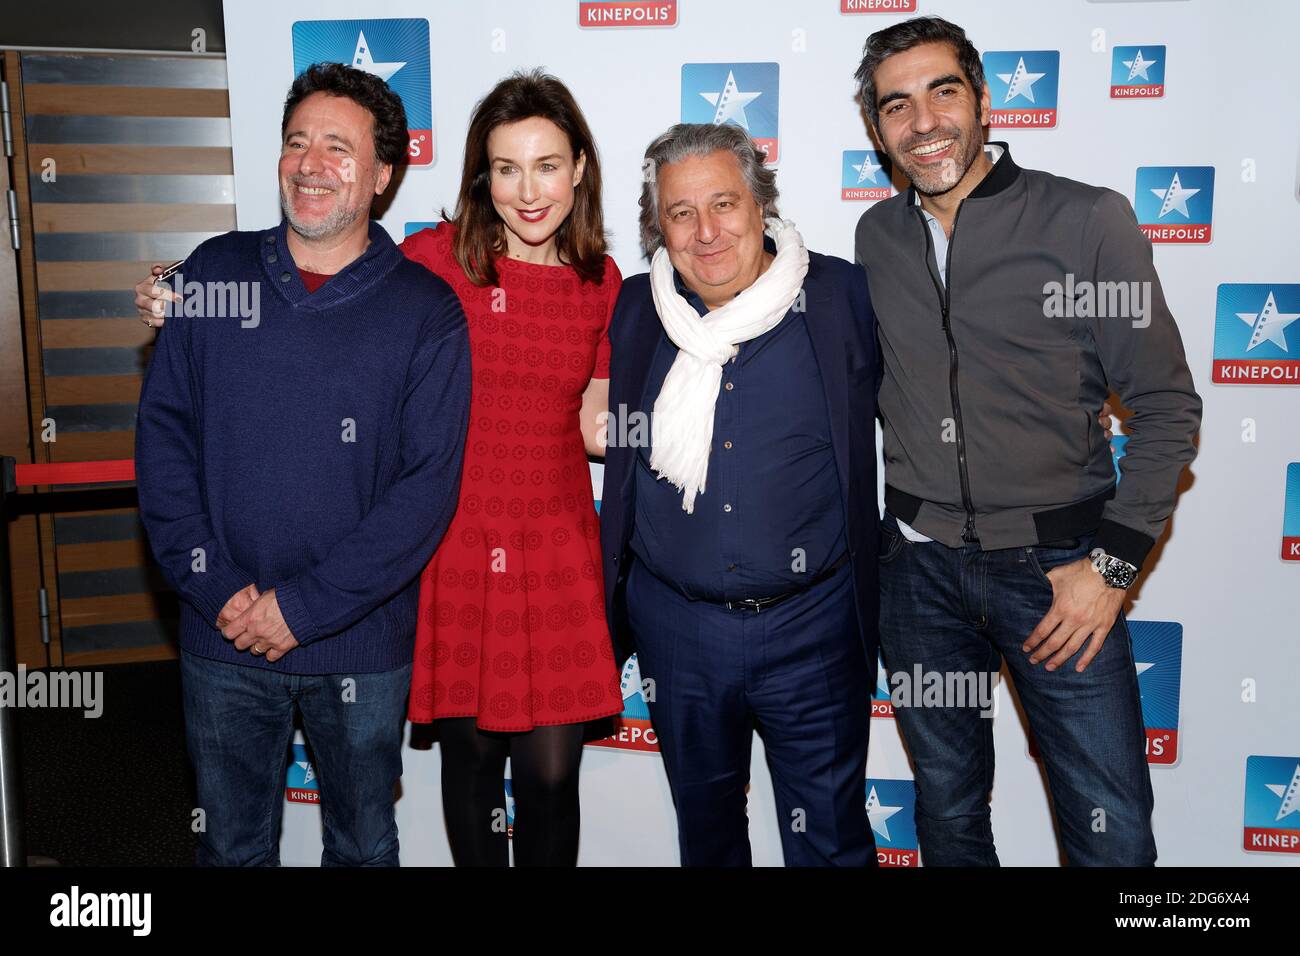 Christian Clavier, Ary Abittan, Elsa Zylberstein, Director Philippe De  Chauveron attending the premiere of A bras ouvertsheld at the Kinepolis in  Lomme, near Lille, France on March 6, 2017. Photo by Sylvain